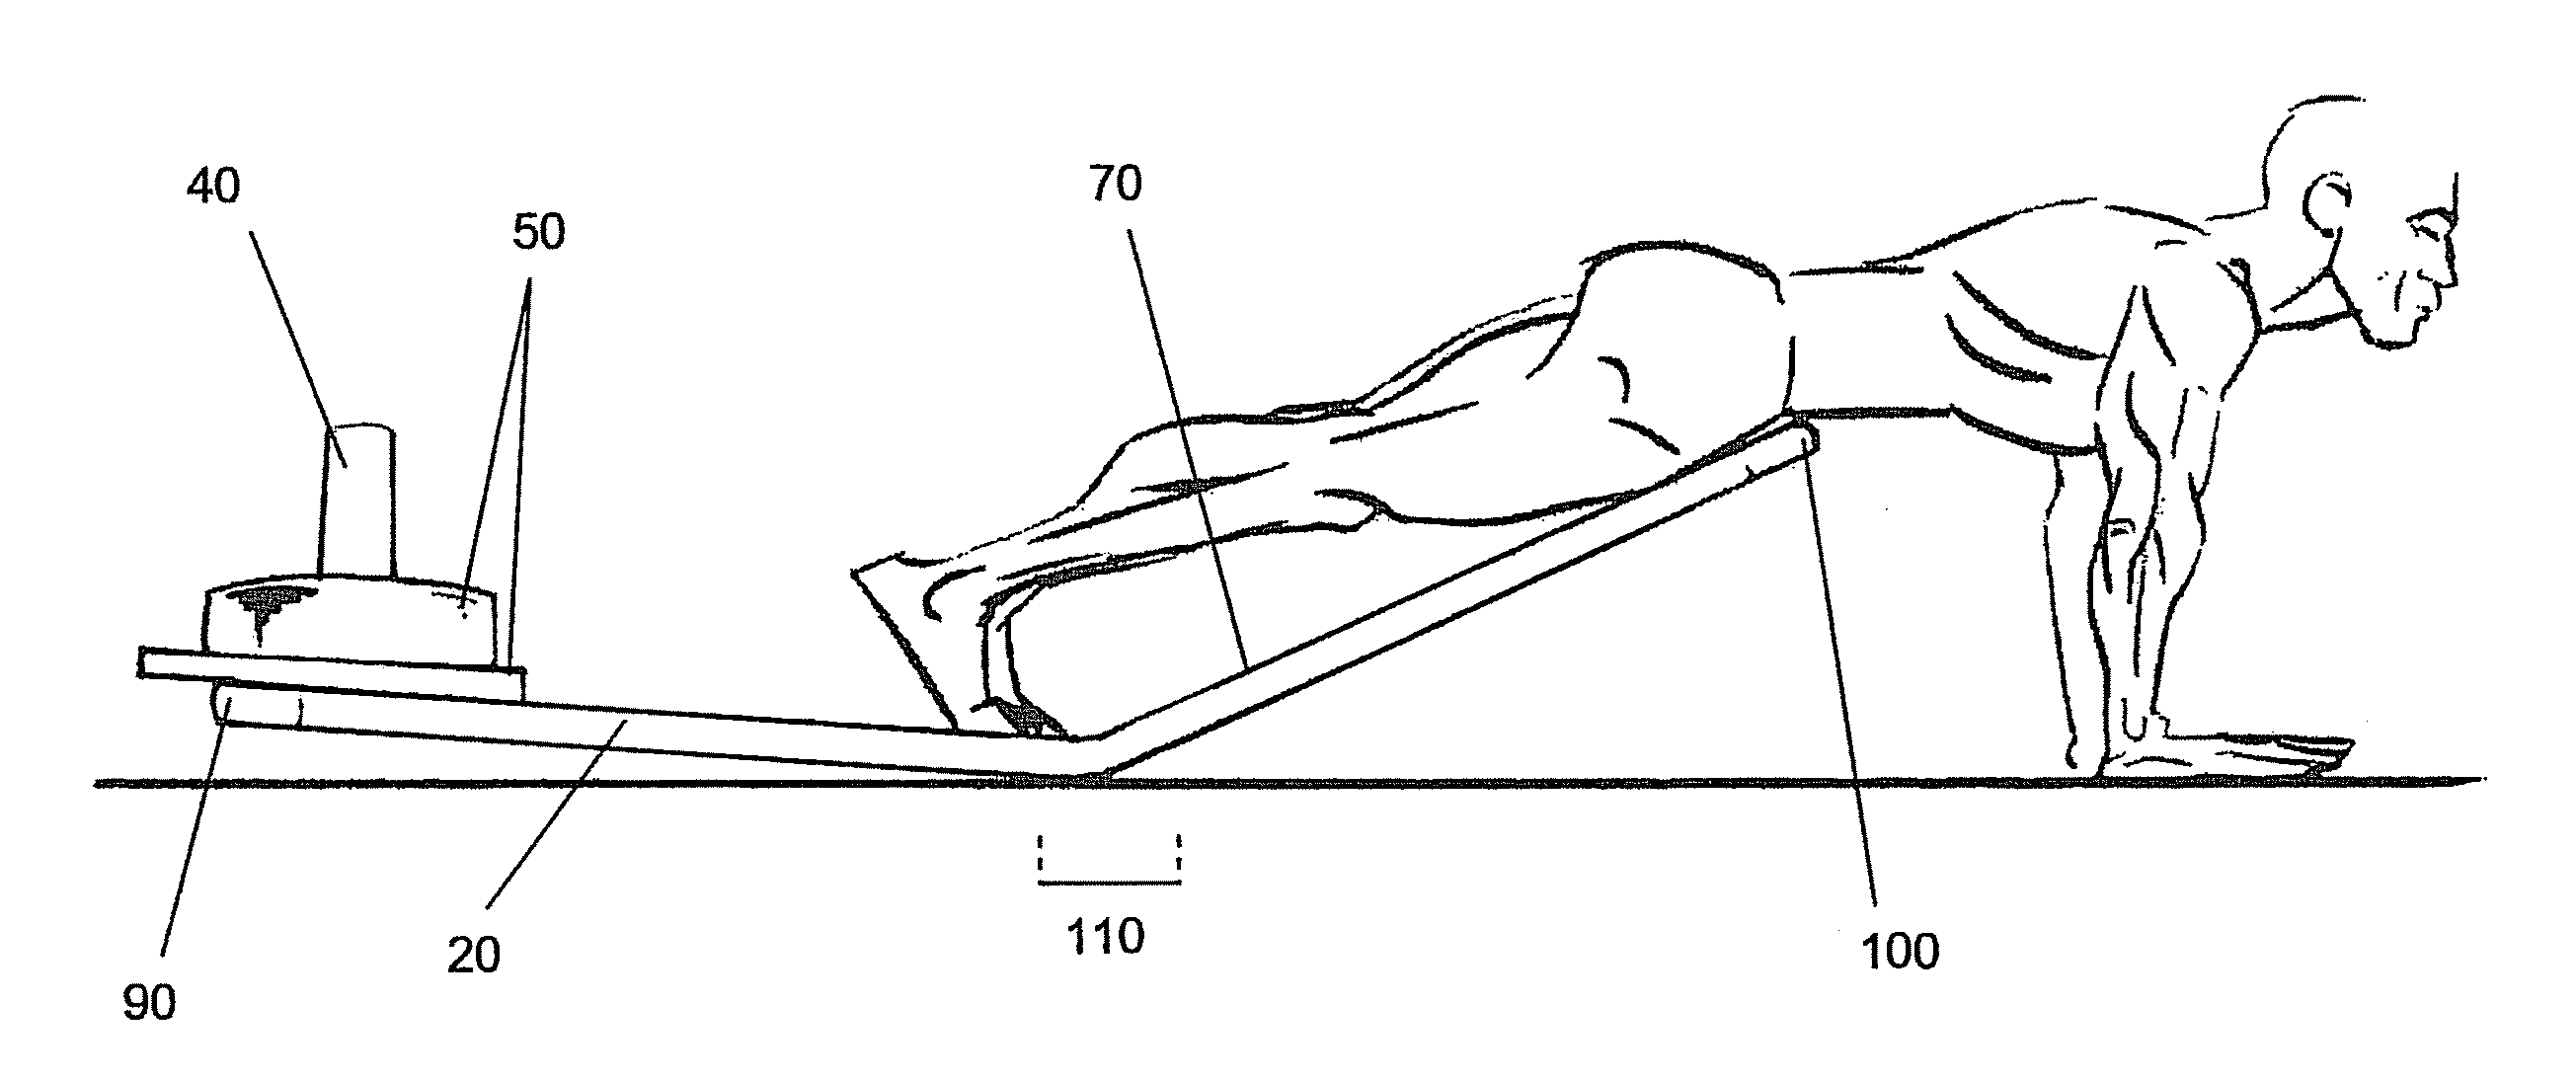 Assisted-exercise apparatus